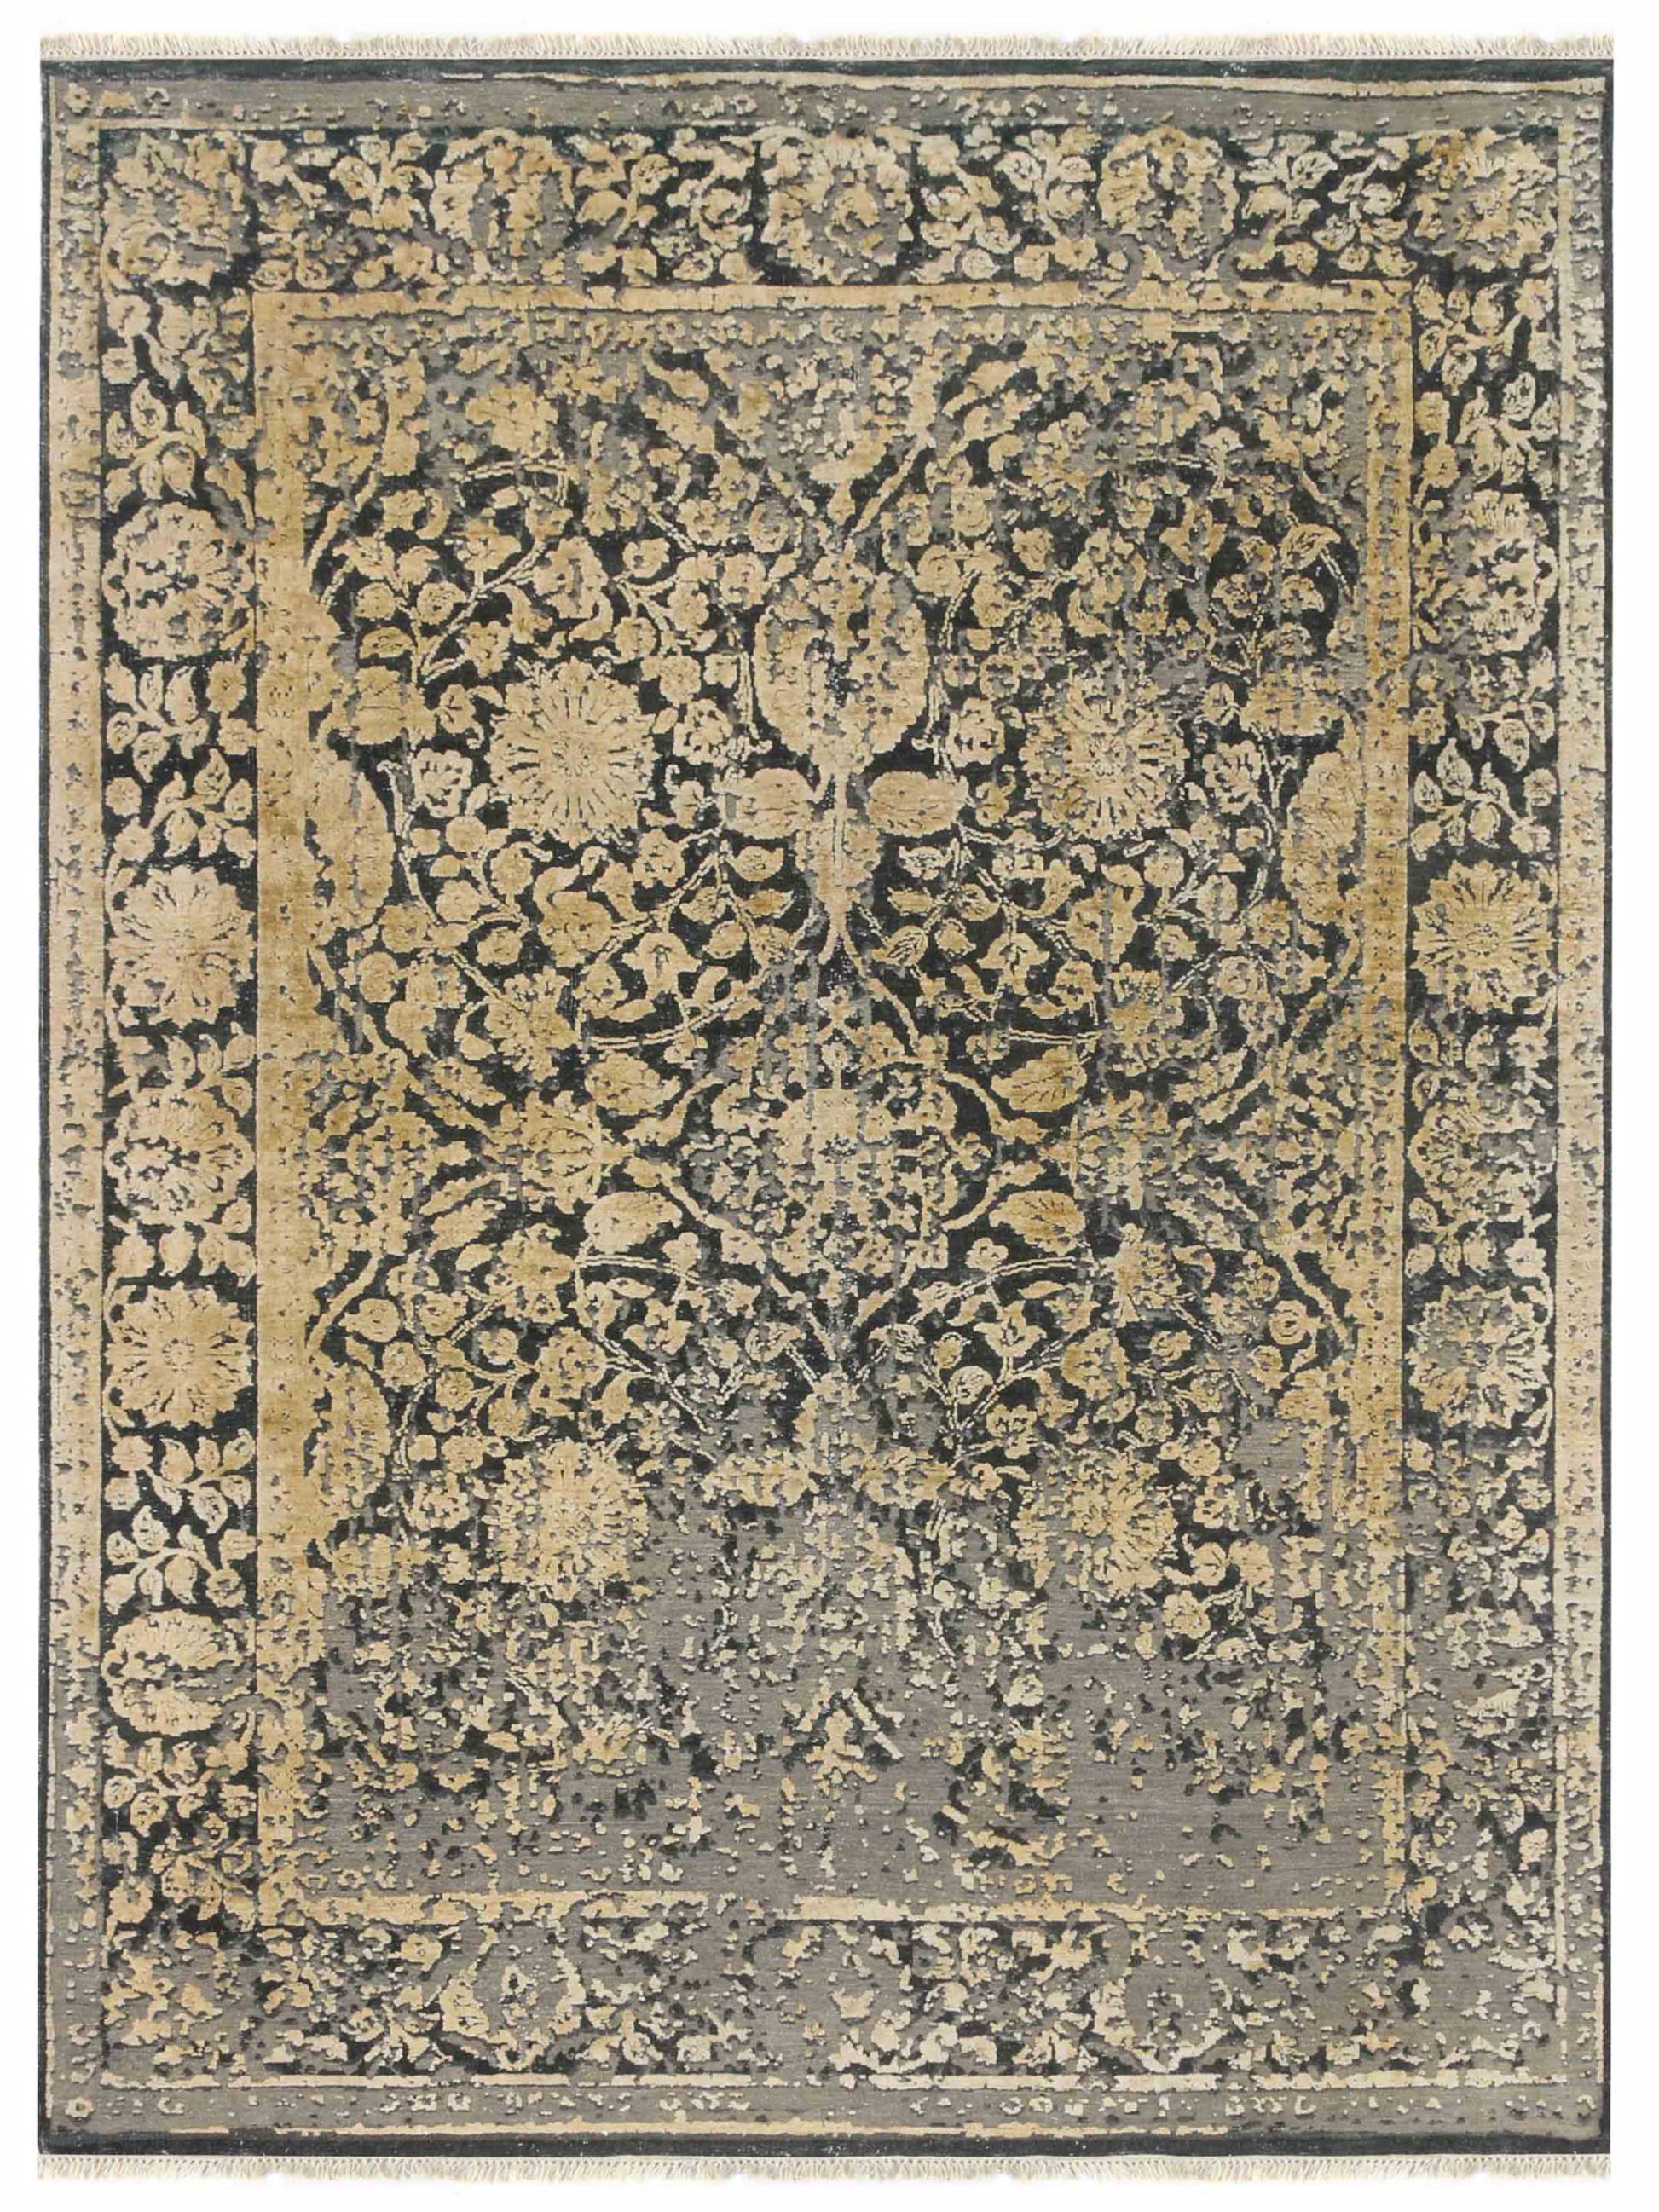 Limited DALBY DA-725 Silver Sand Light Gold Traditional Knotted Rug